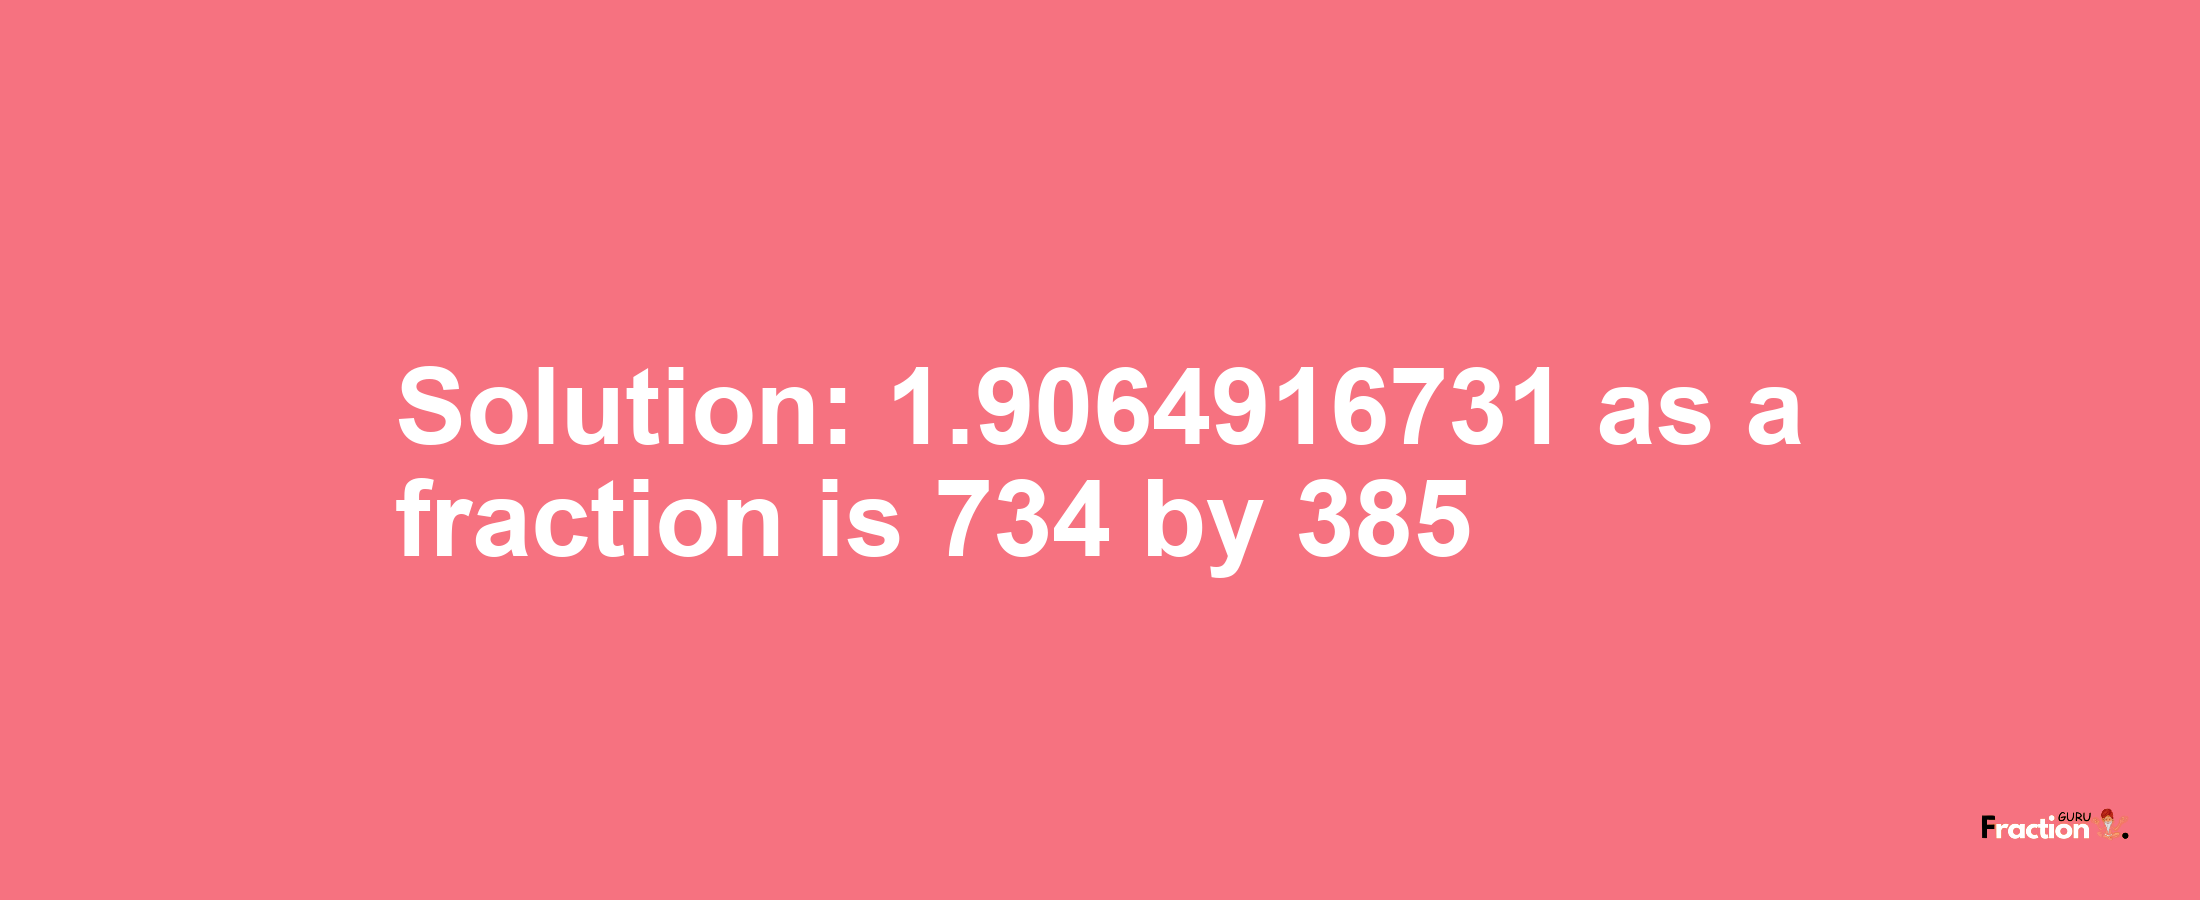 Solution:1.9064916731 as a fraction is 734/385